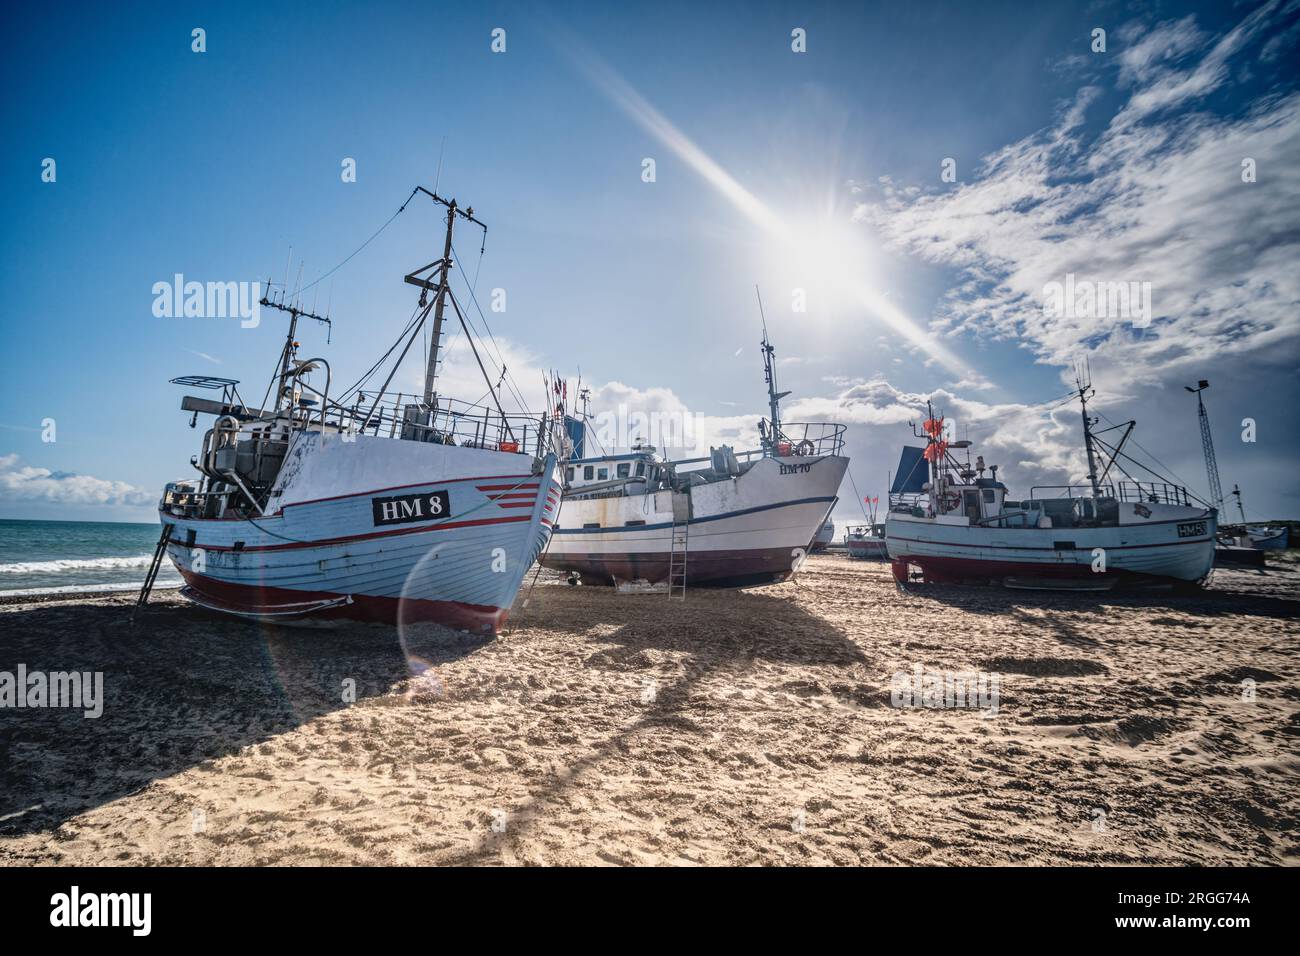 Traditional fishing vessels boats on the beach of Thorupstrand, Denmark Stock Photo